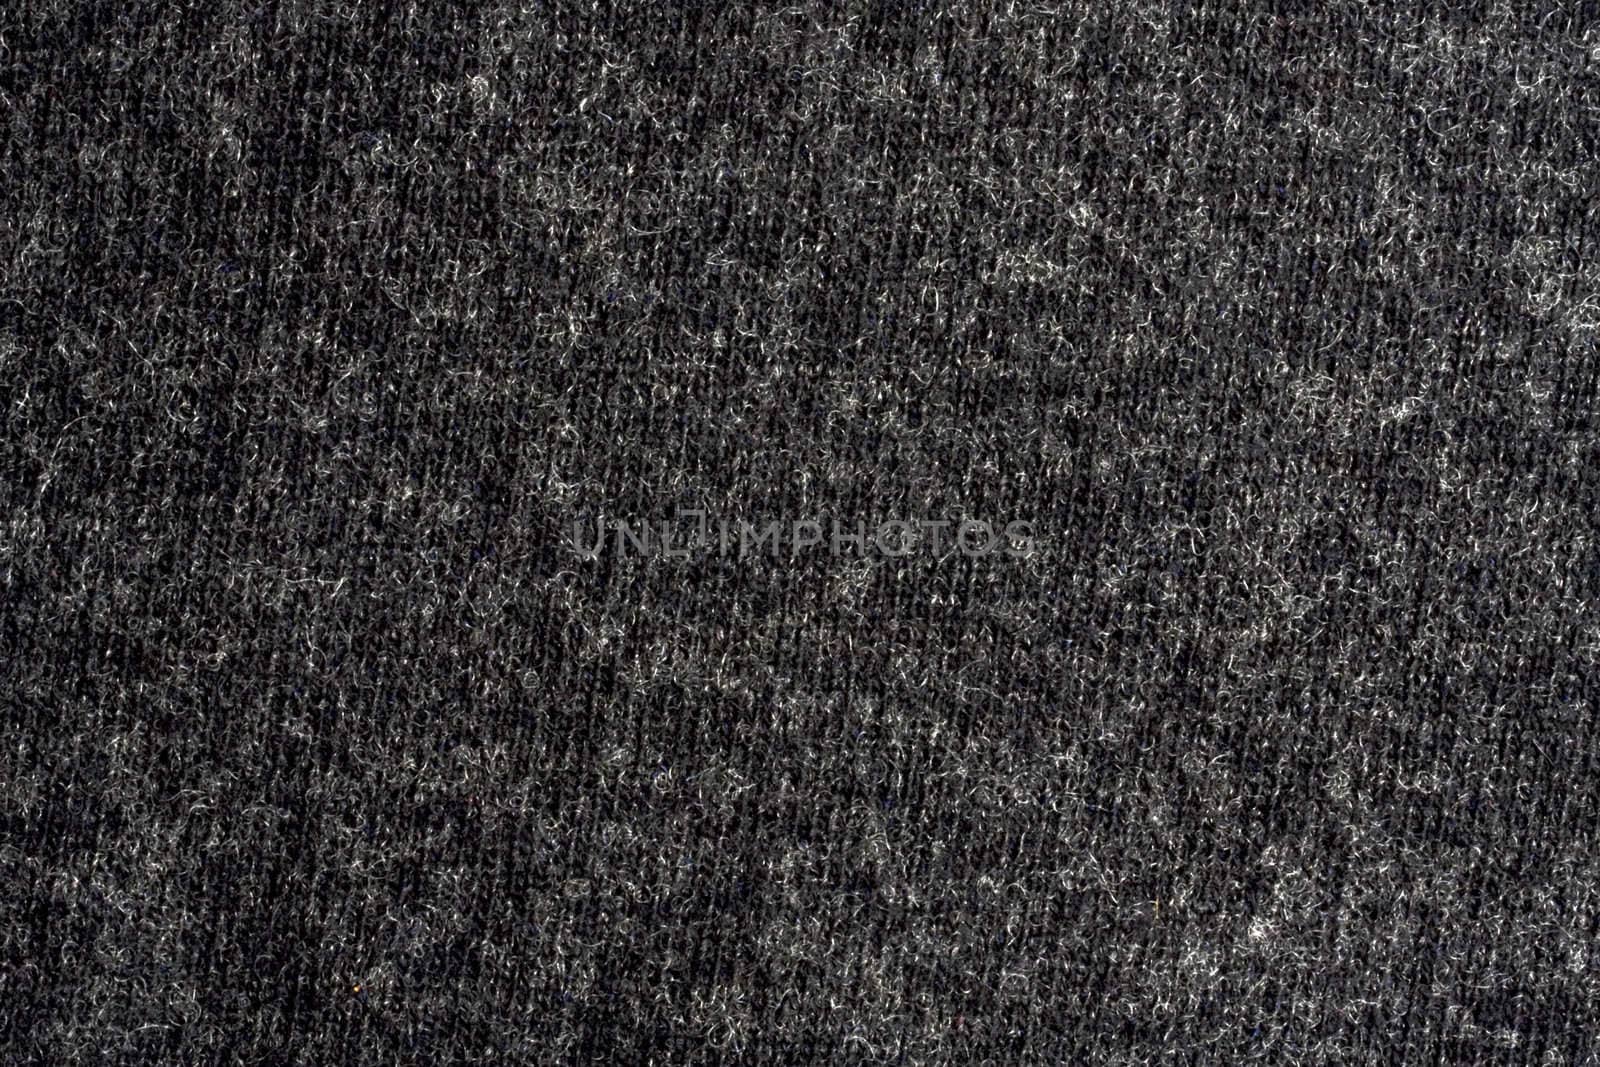 Black Wool texture background by ibphoto